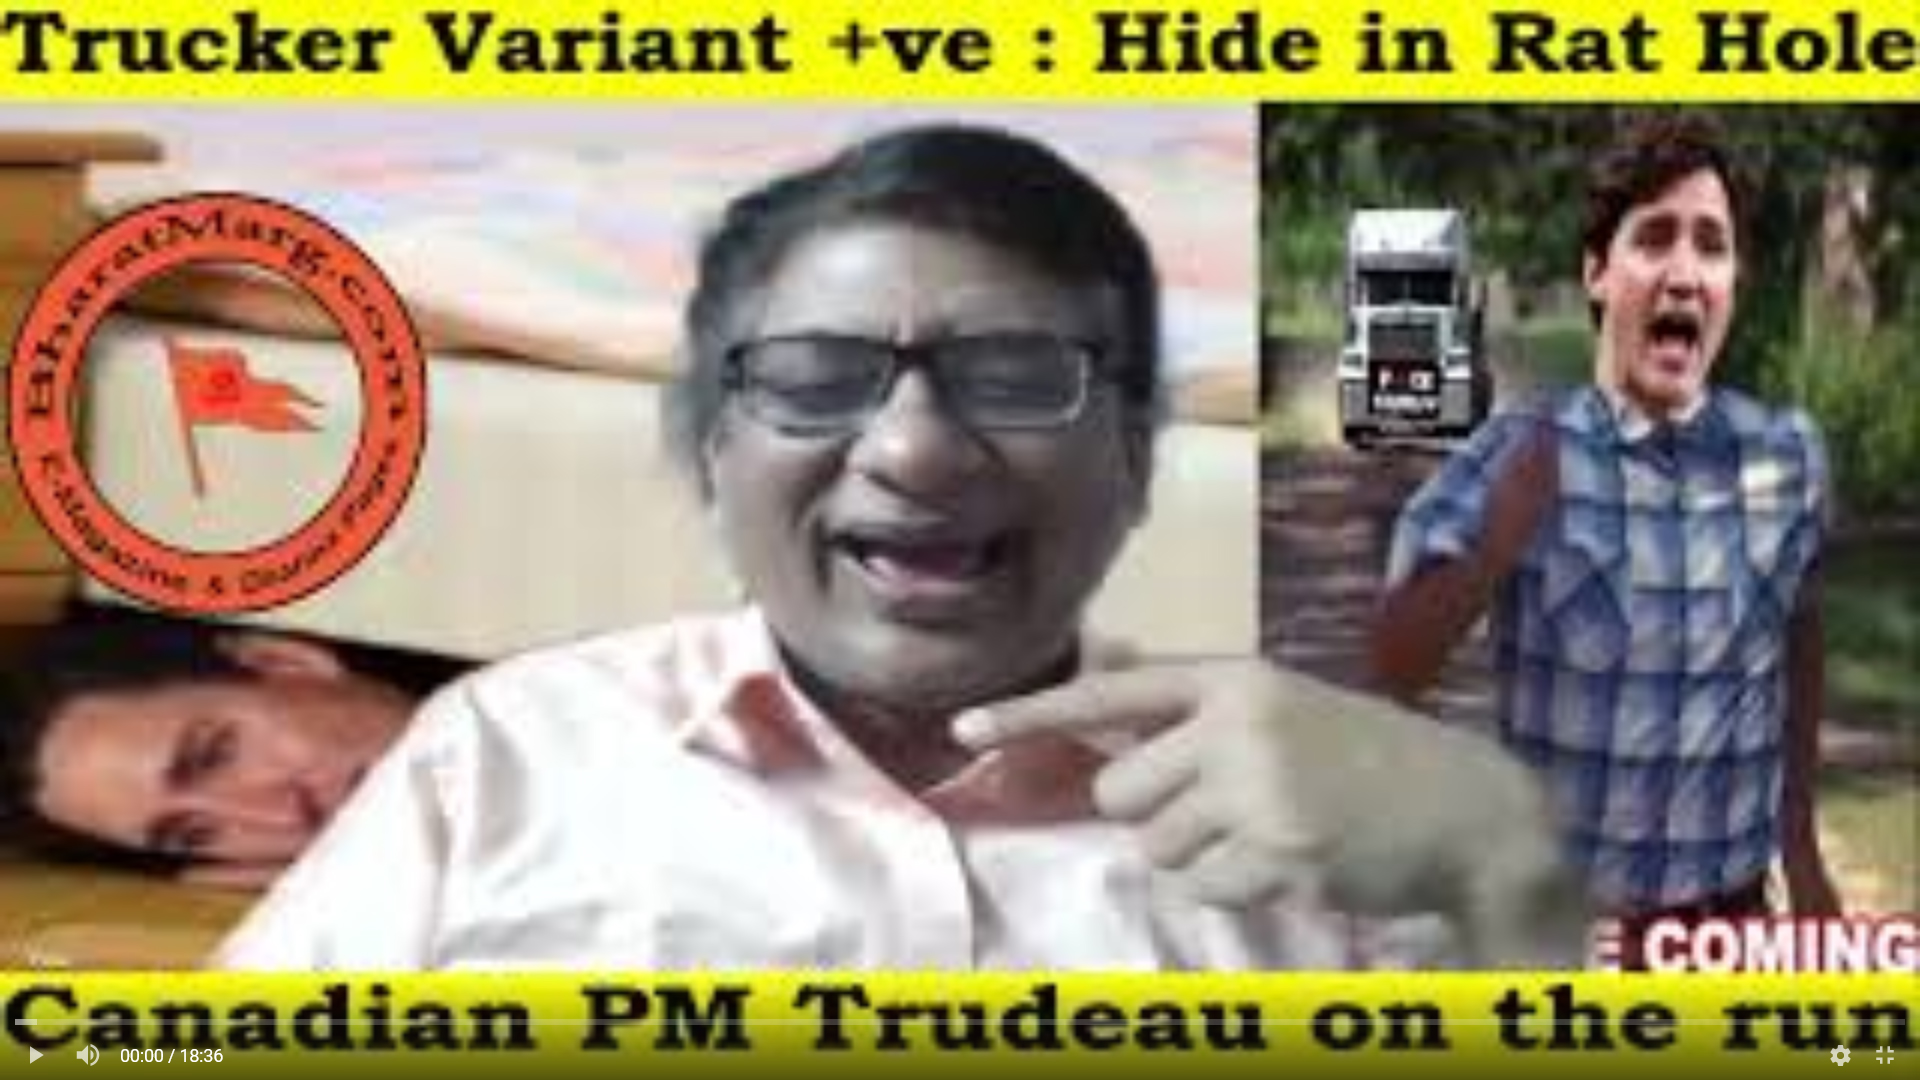 Trucker Variant +ve : Hide in Rat Hole – Canadian PM Trudeau on run